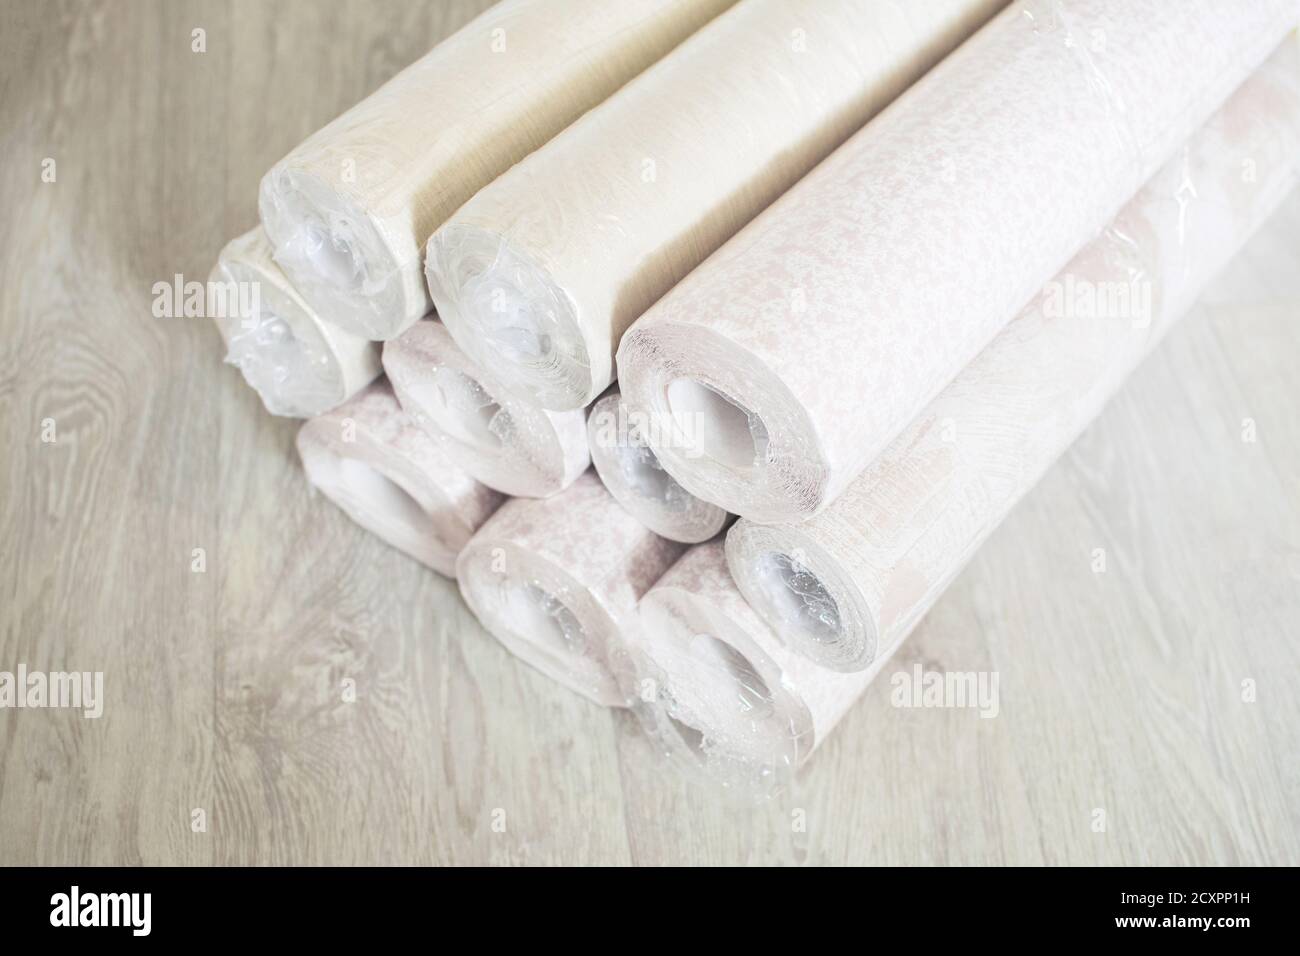 Several rolls of pastel paper wallpaper for wall renovation. Paperhangings on the floor. Wallpaper or paperhangings delivery. Stock Photo